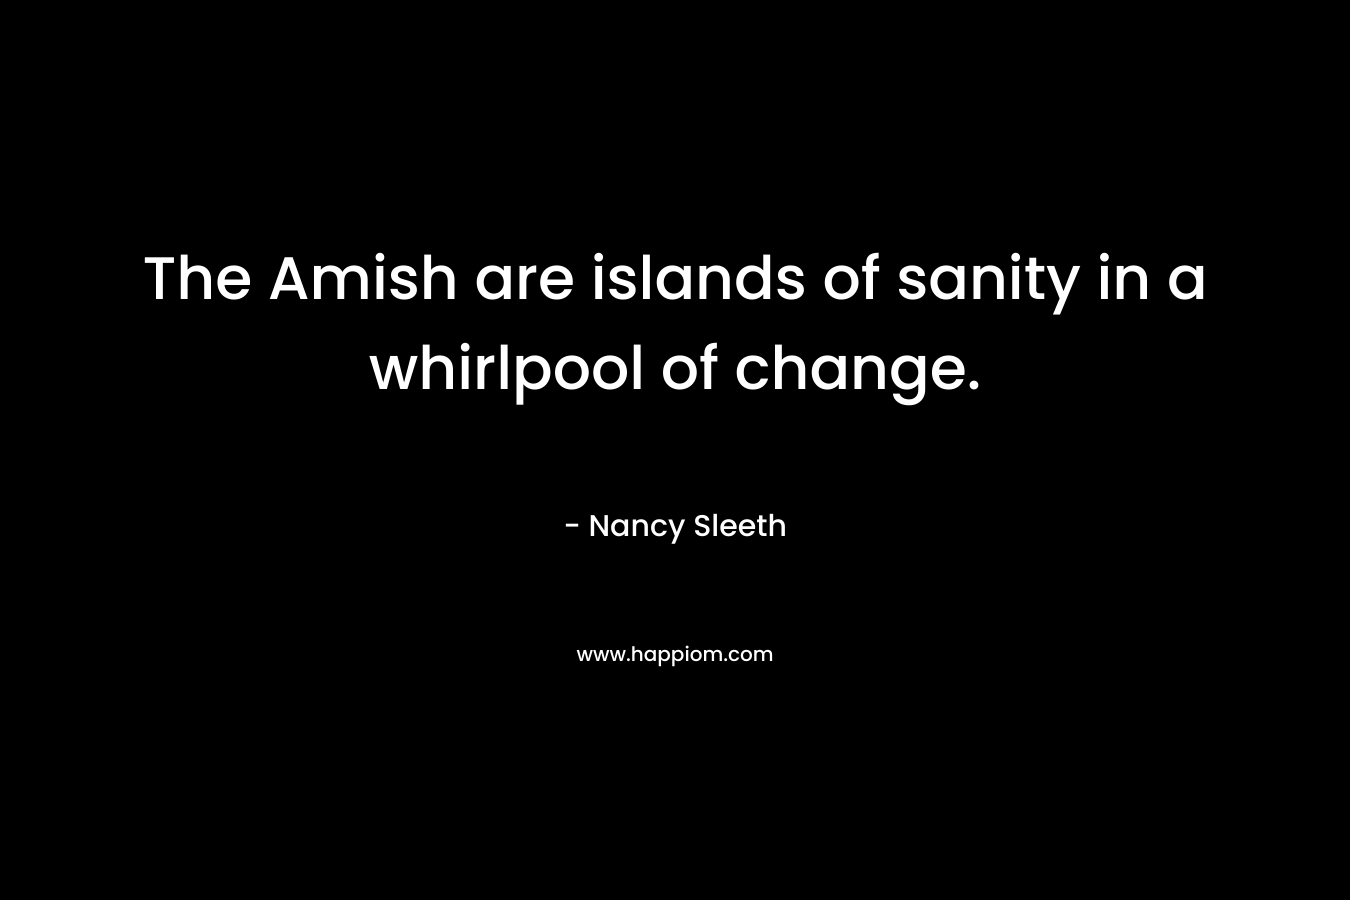 The Amish are islands of sanity in a whirlpool of change. – Nancy Sleeth